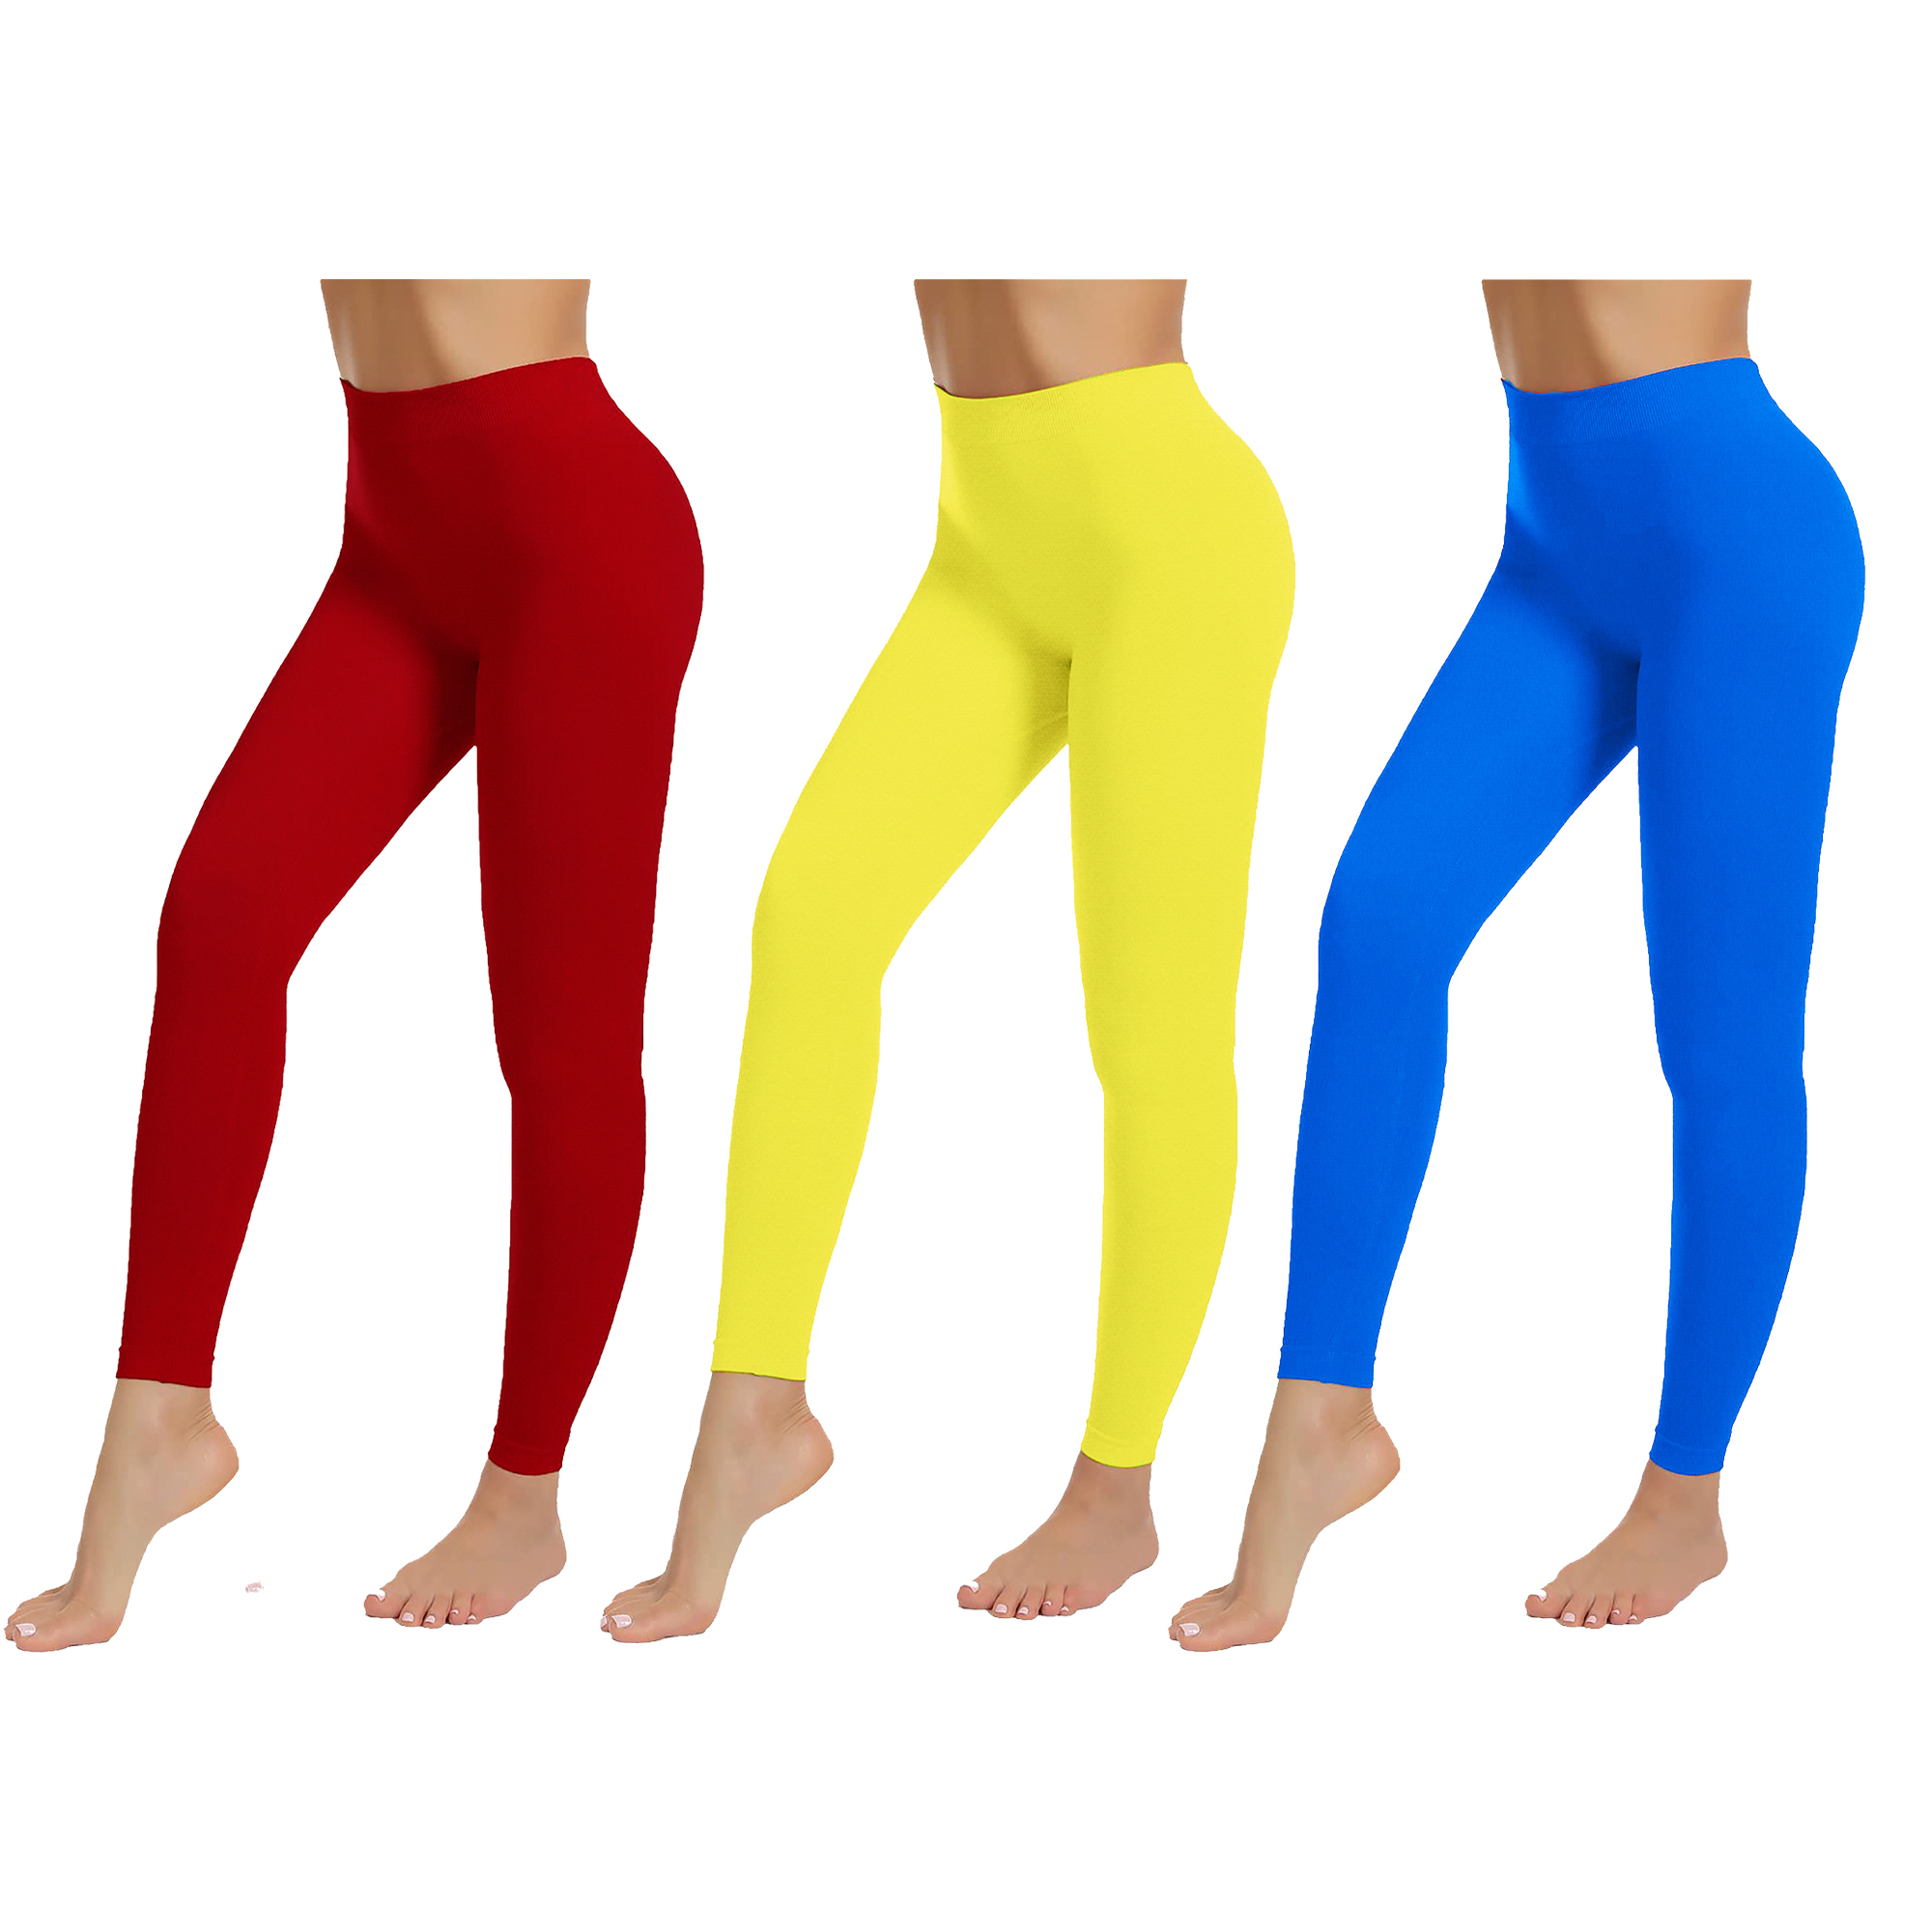 3-Pack: Women's High-Waist Ultra-Soft Stretchy Solid Fitness Yoga Leggings Pants - YELLOW, S